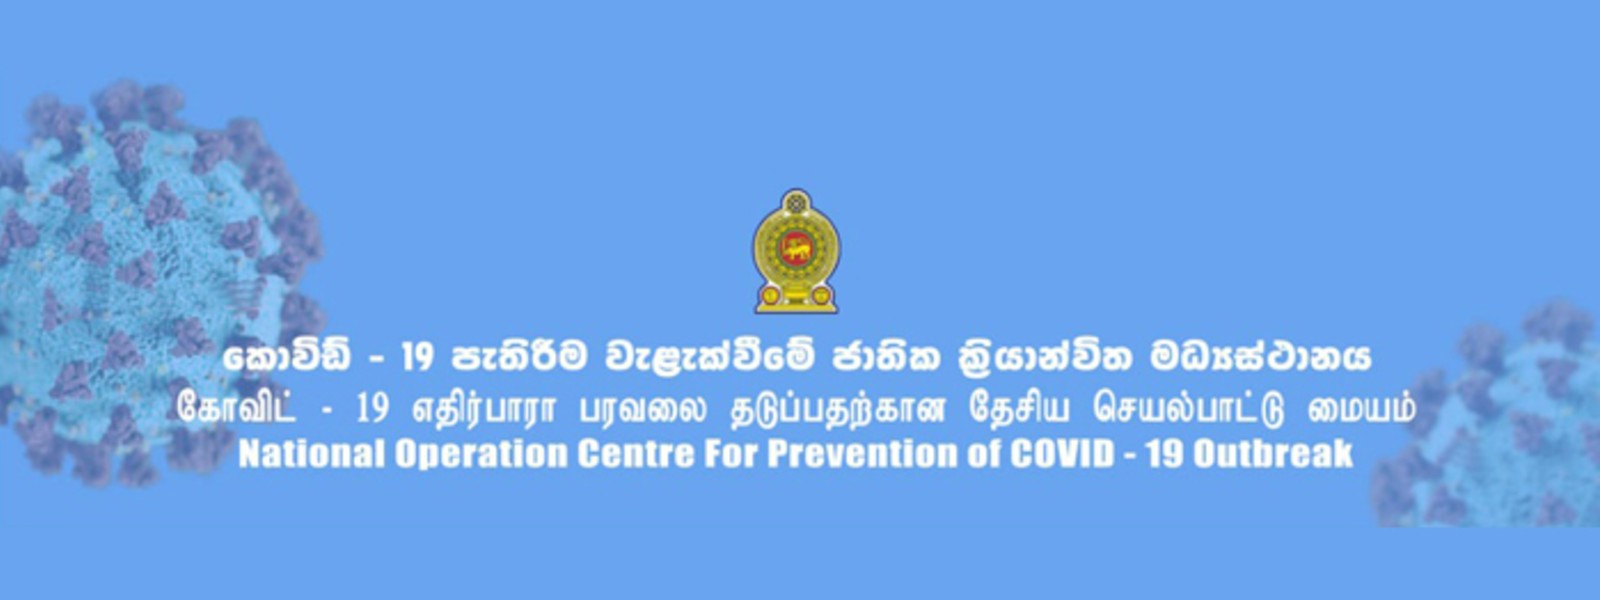 305 COVID-19 cases reported from Colombo on Thursday (19) – NOCPCO